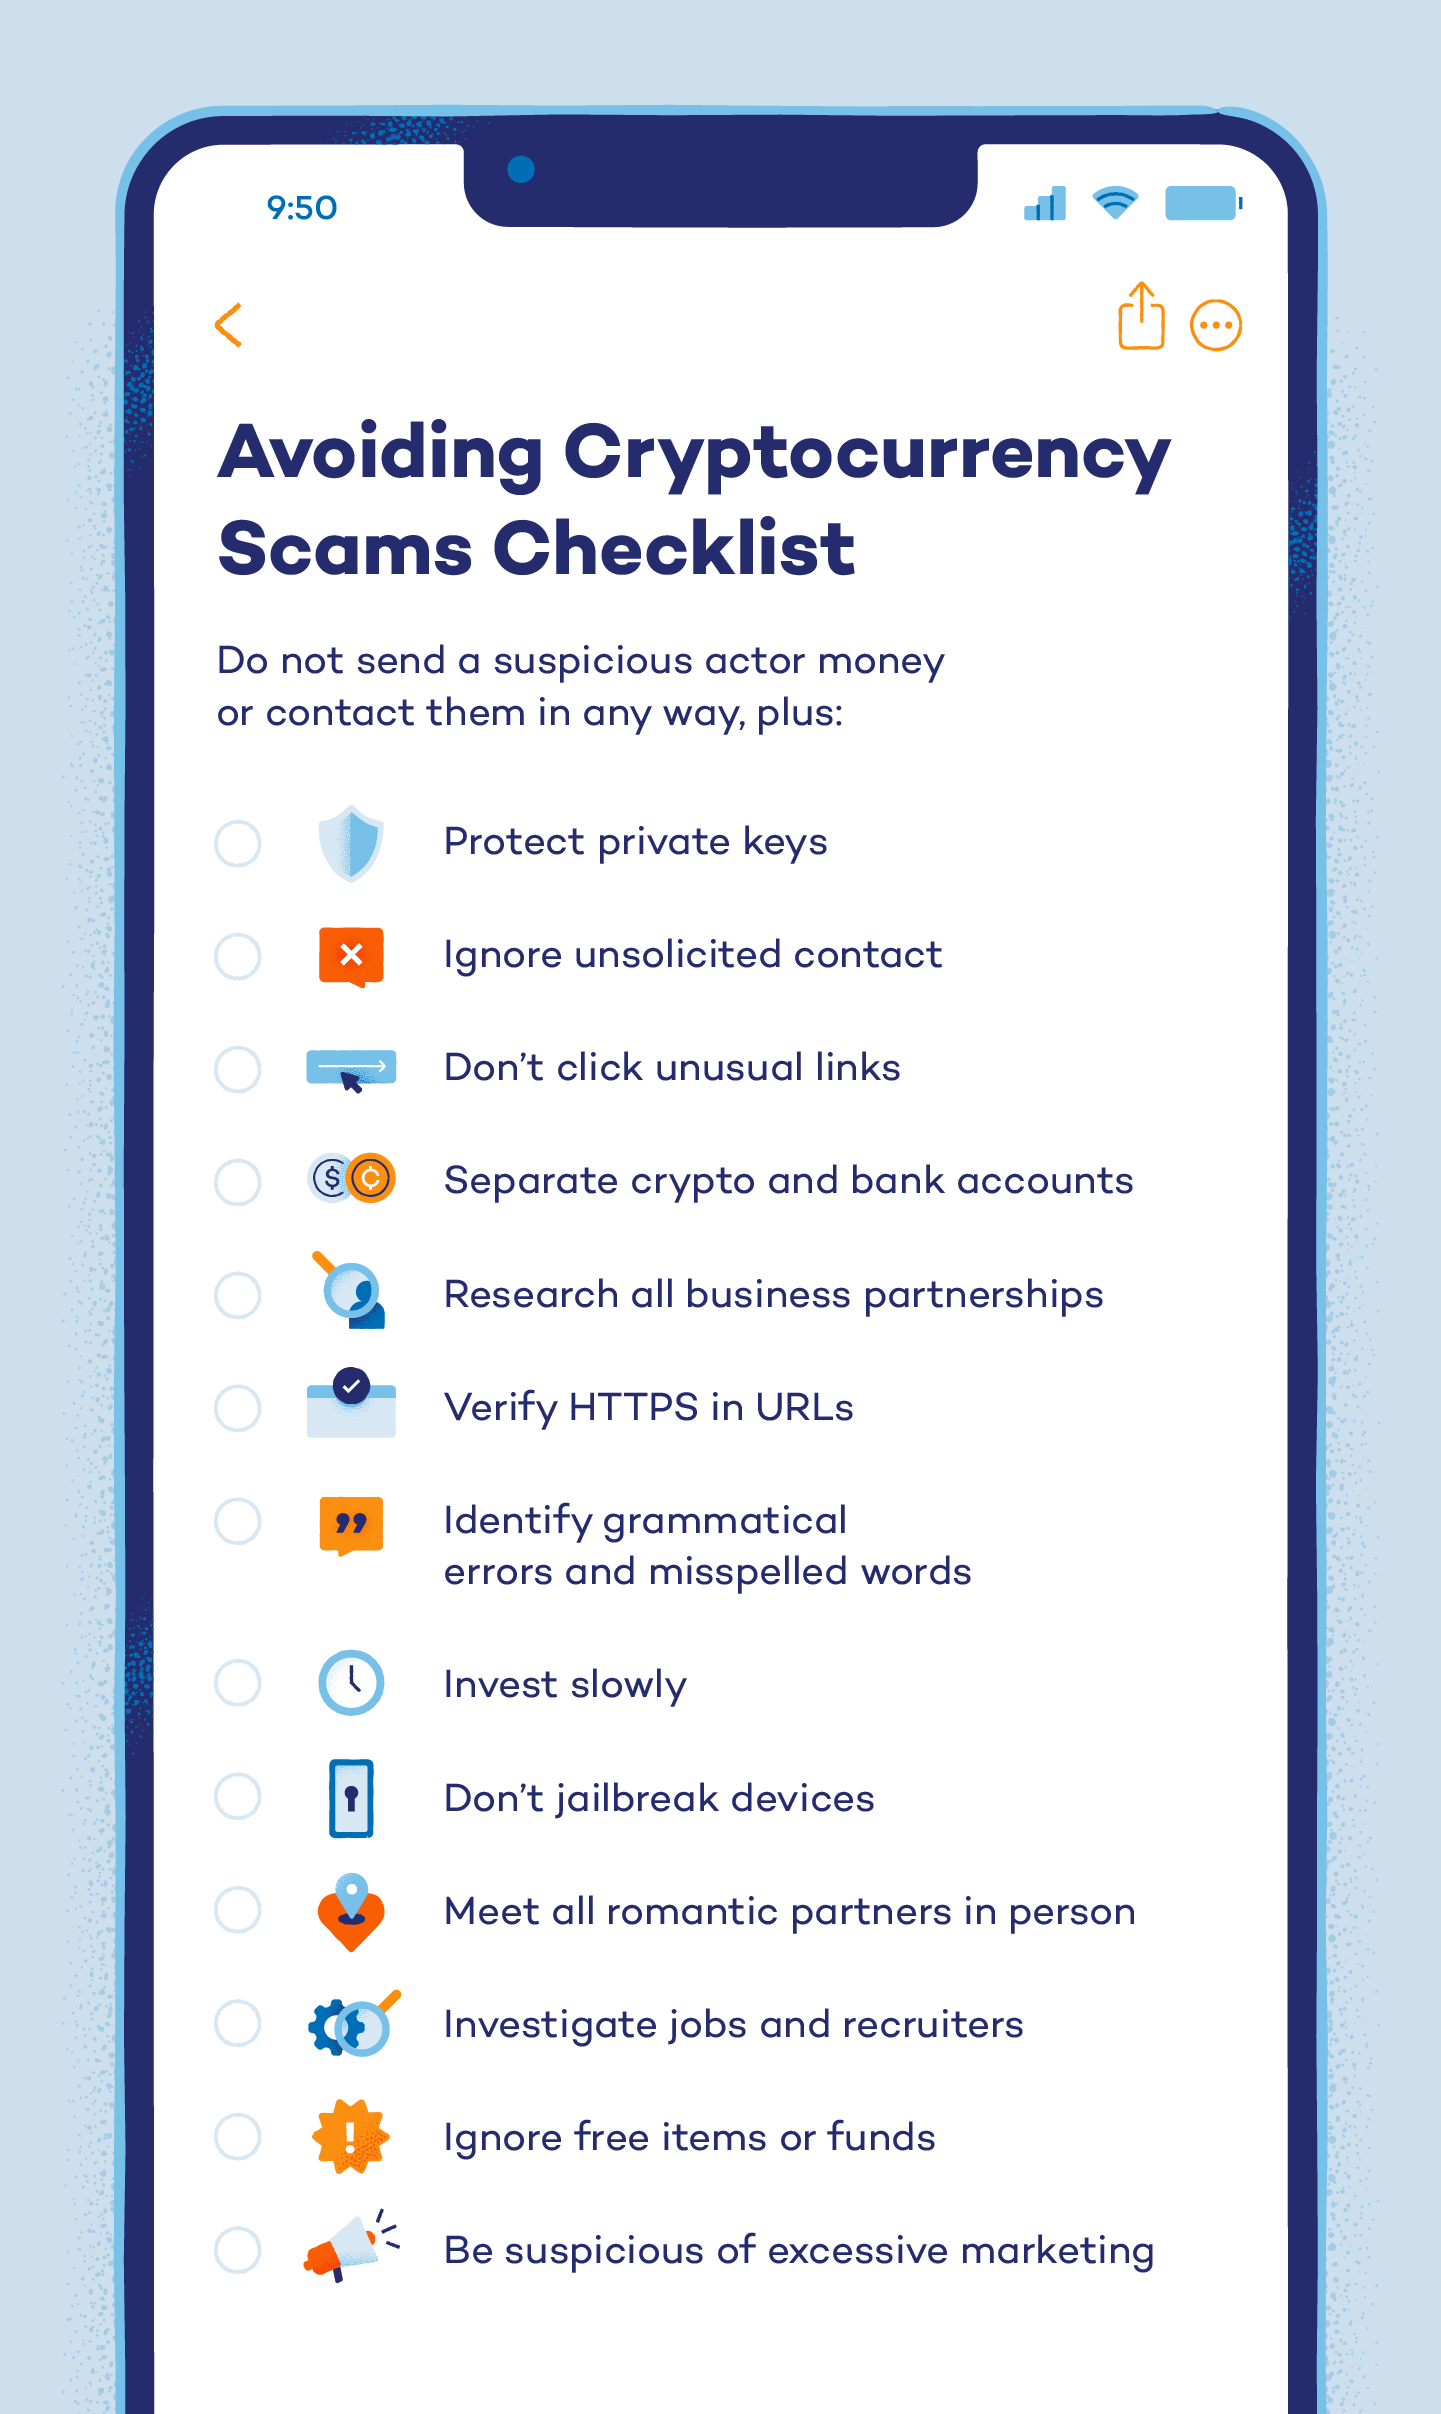 A list of thirteen ways to avoid cryptocurrency scams.